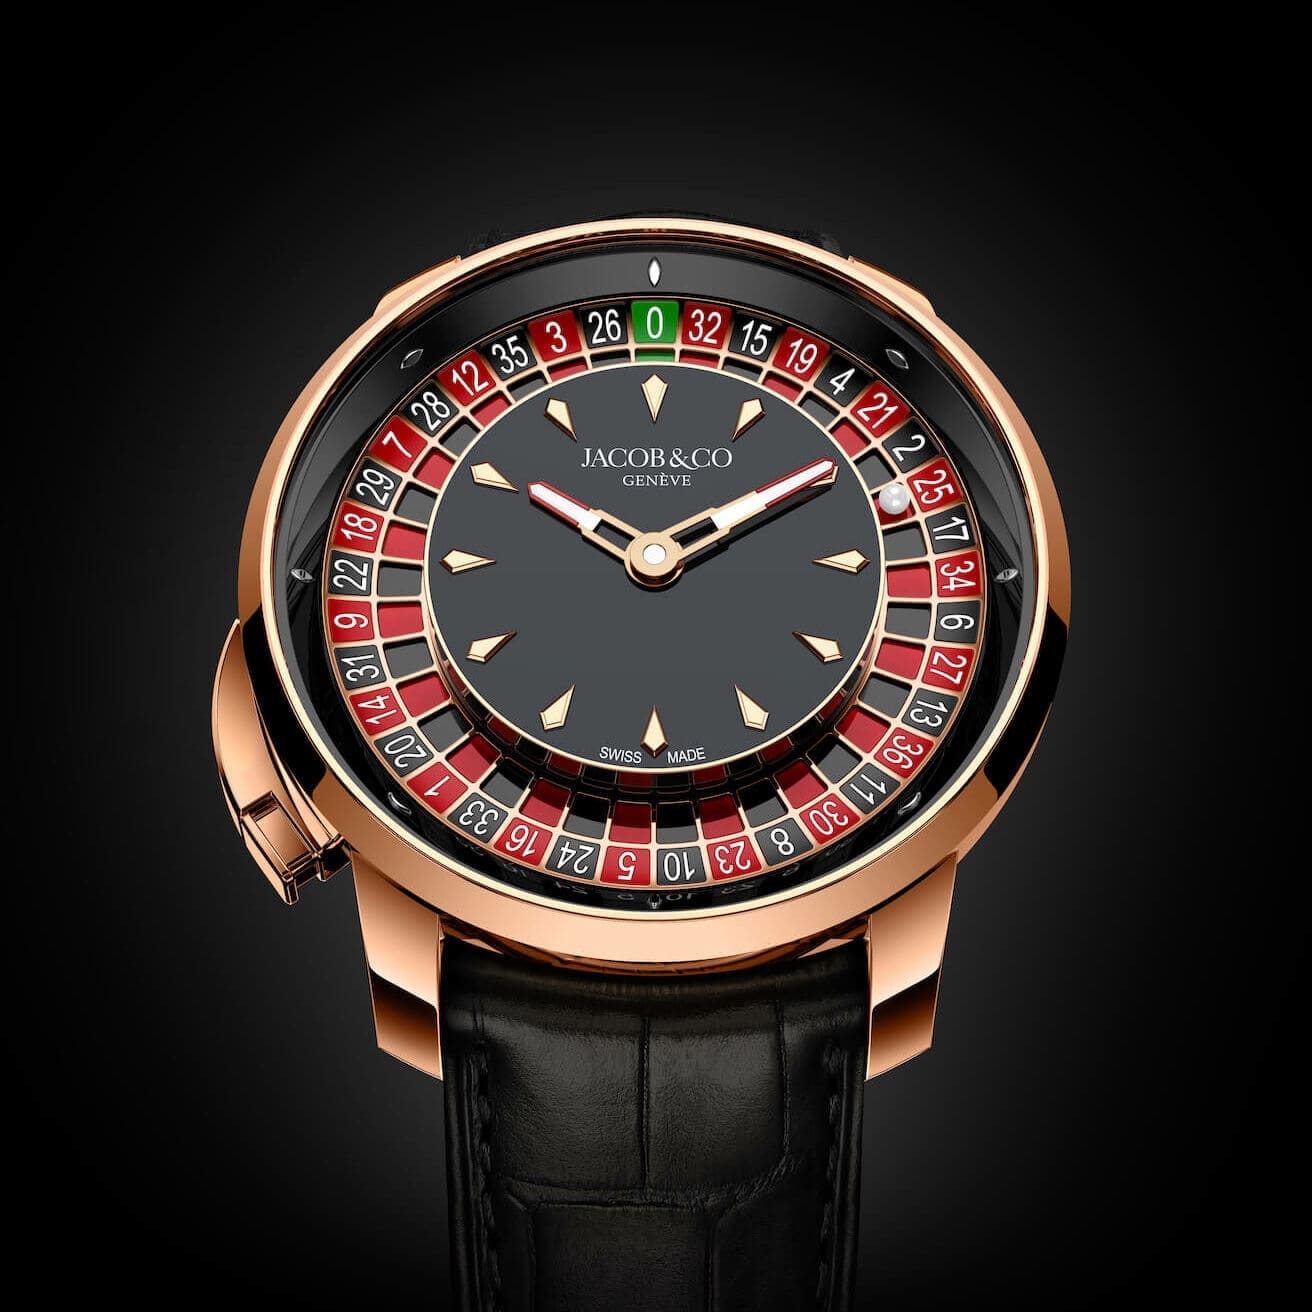 The Jacob & Co. Casino Roulette Tourbillon is every gambler’s dream – or worst enabler